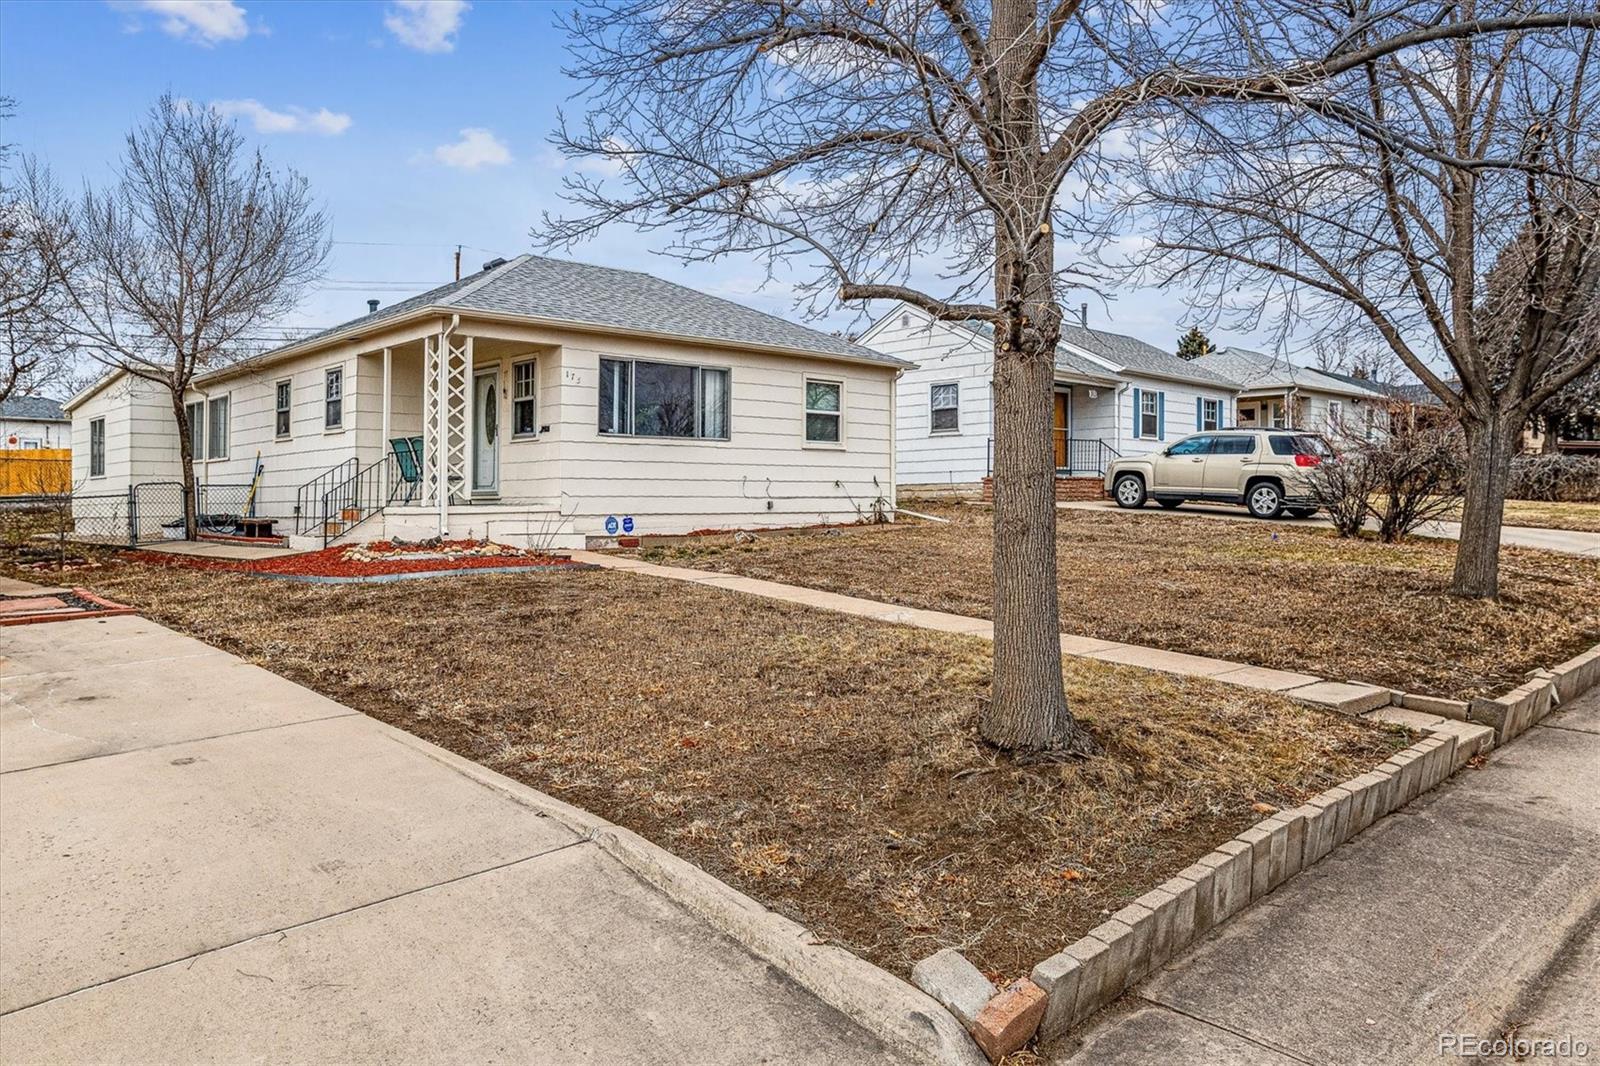 Photo one of 175 S Clay St Denver CO 80219 | MLS 4301793